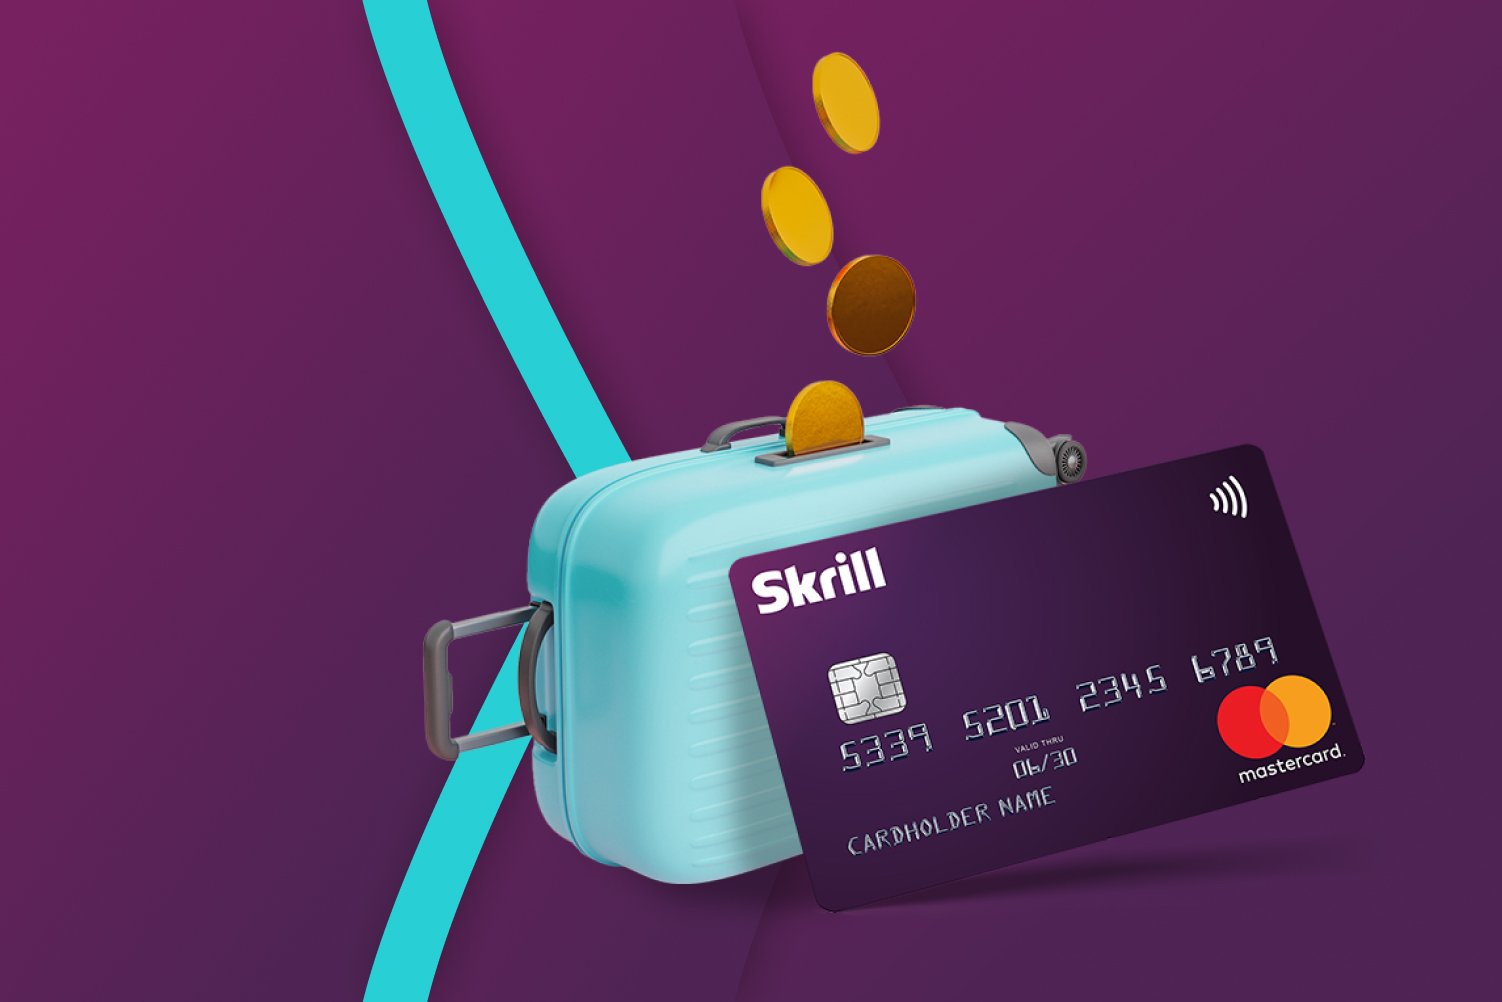 Skrill Prepaid Mastercard with suitcase and money coins